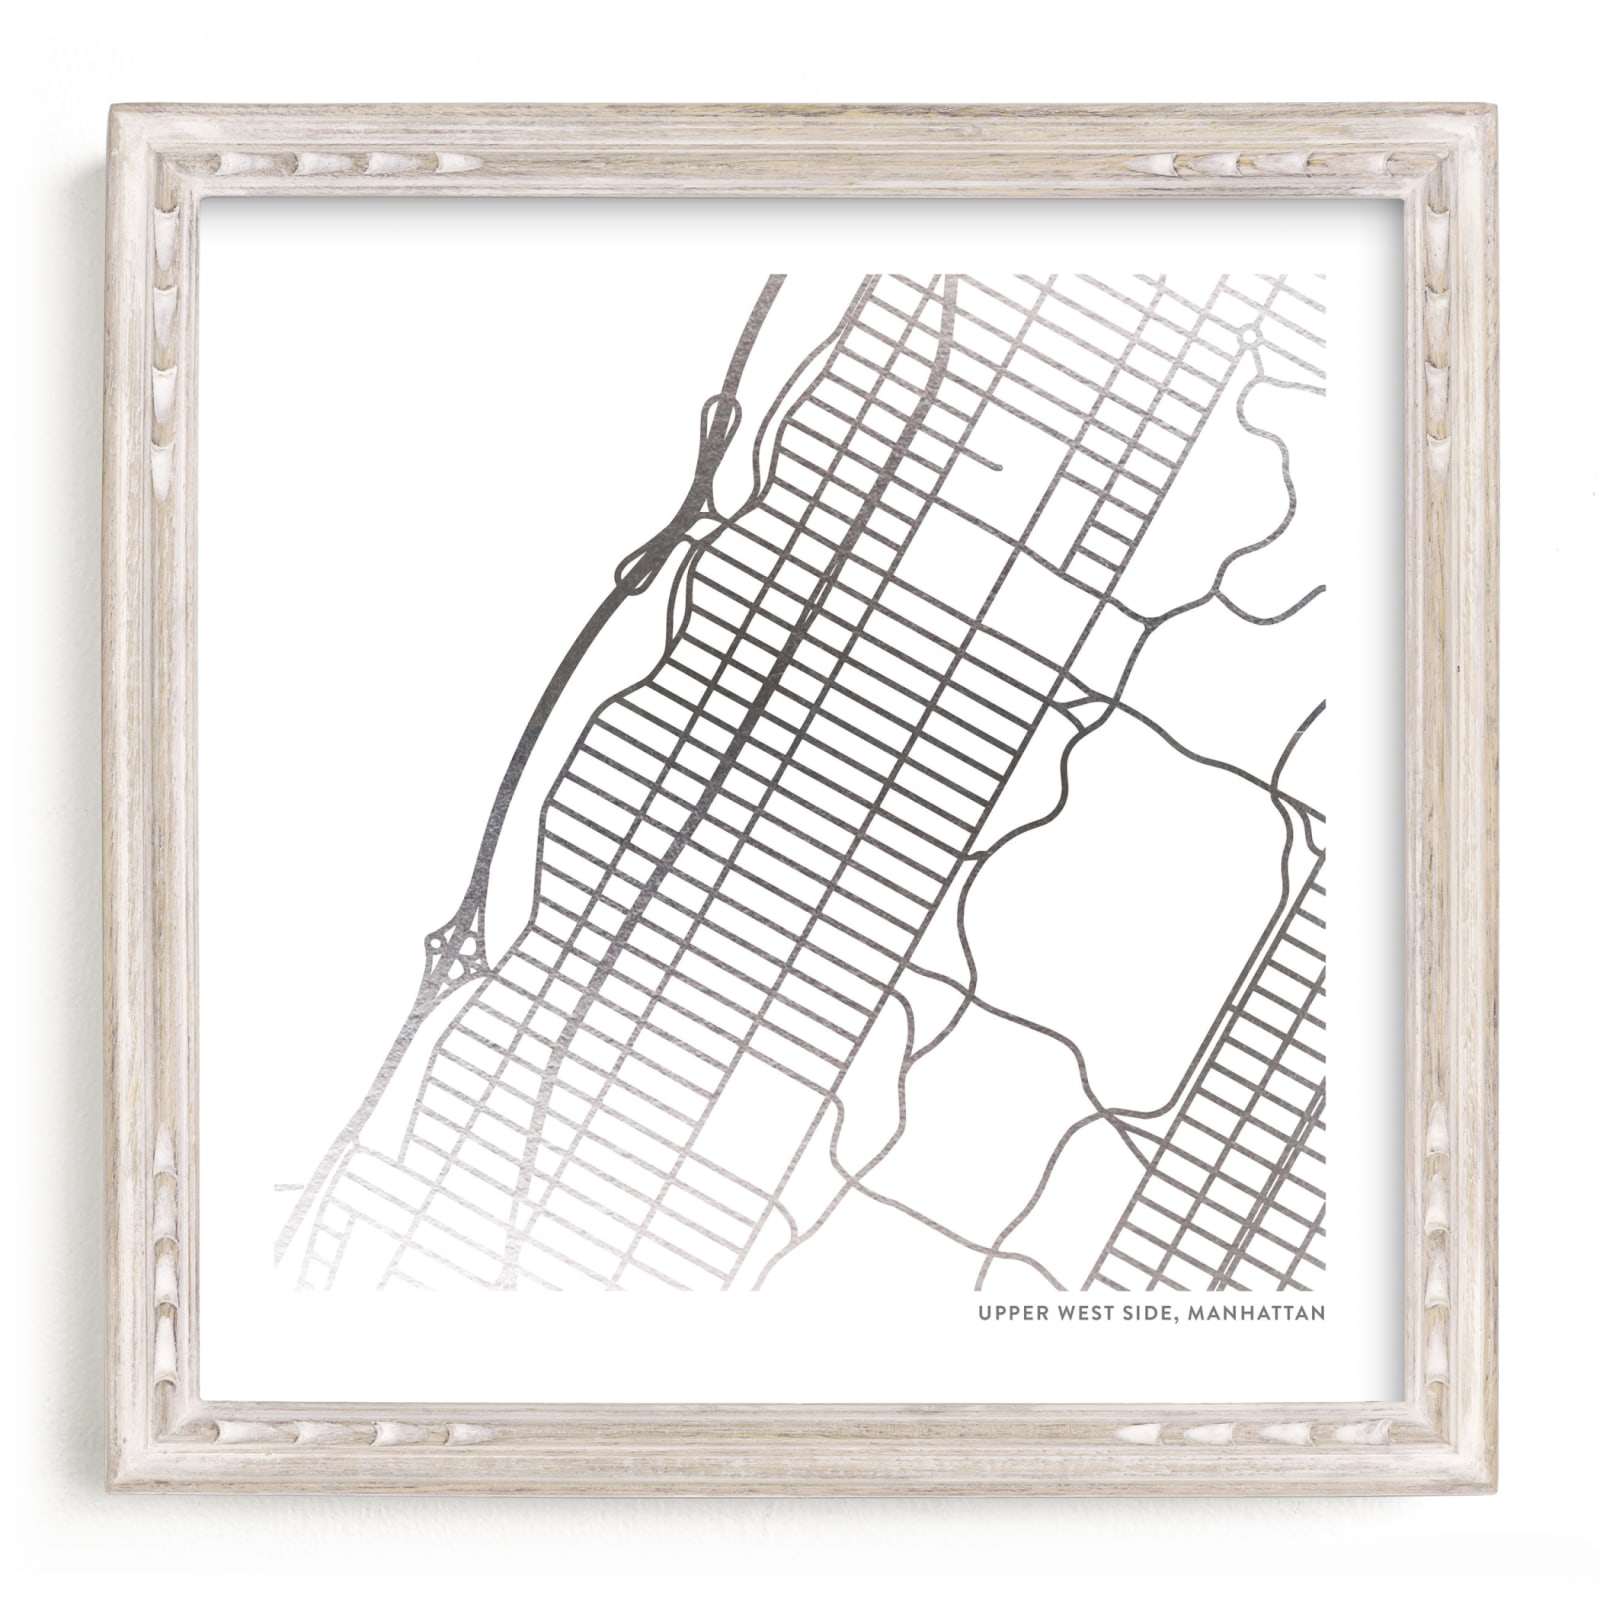 This is a silver custom map printing by Minted called Custom Map Foil Art.